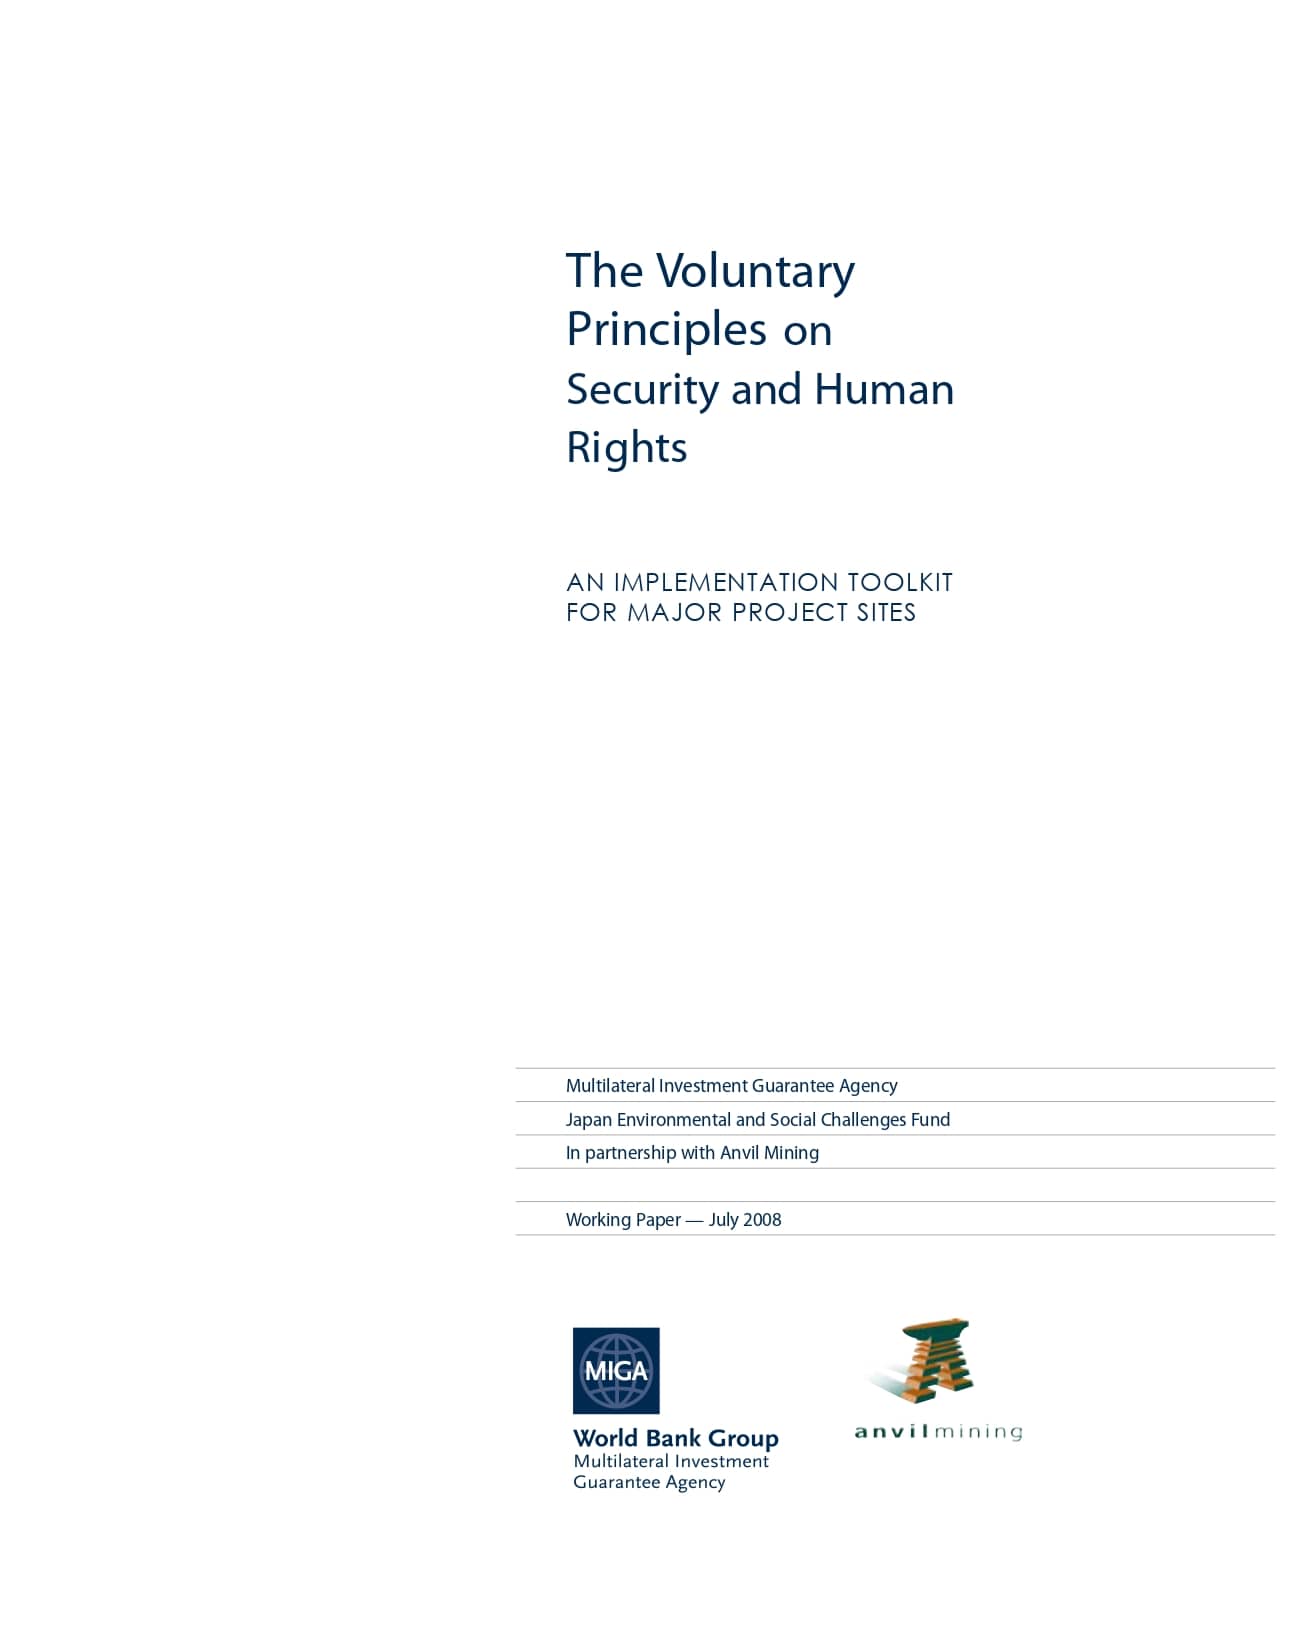 The Voluntary Principles on Security and Human Rights: An Implementation Toolkit for Major Project Sites (World Bank Group Multilateral Investment Guarantee Agency and Anvil Mining